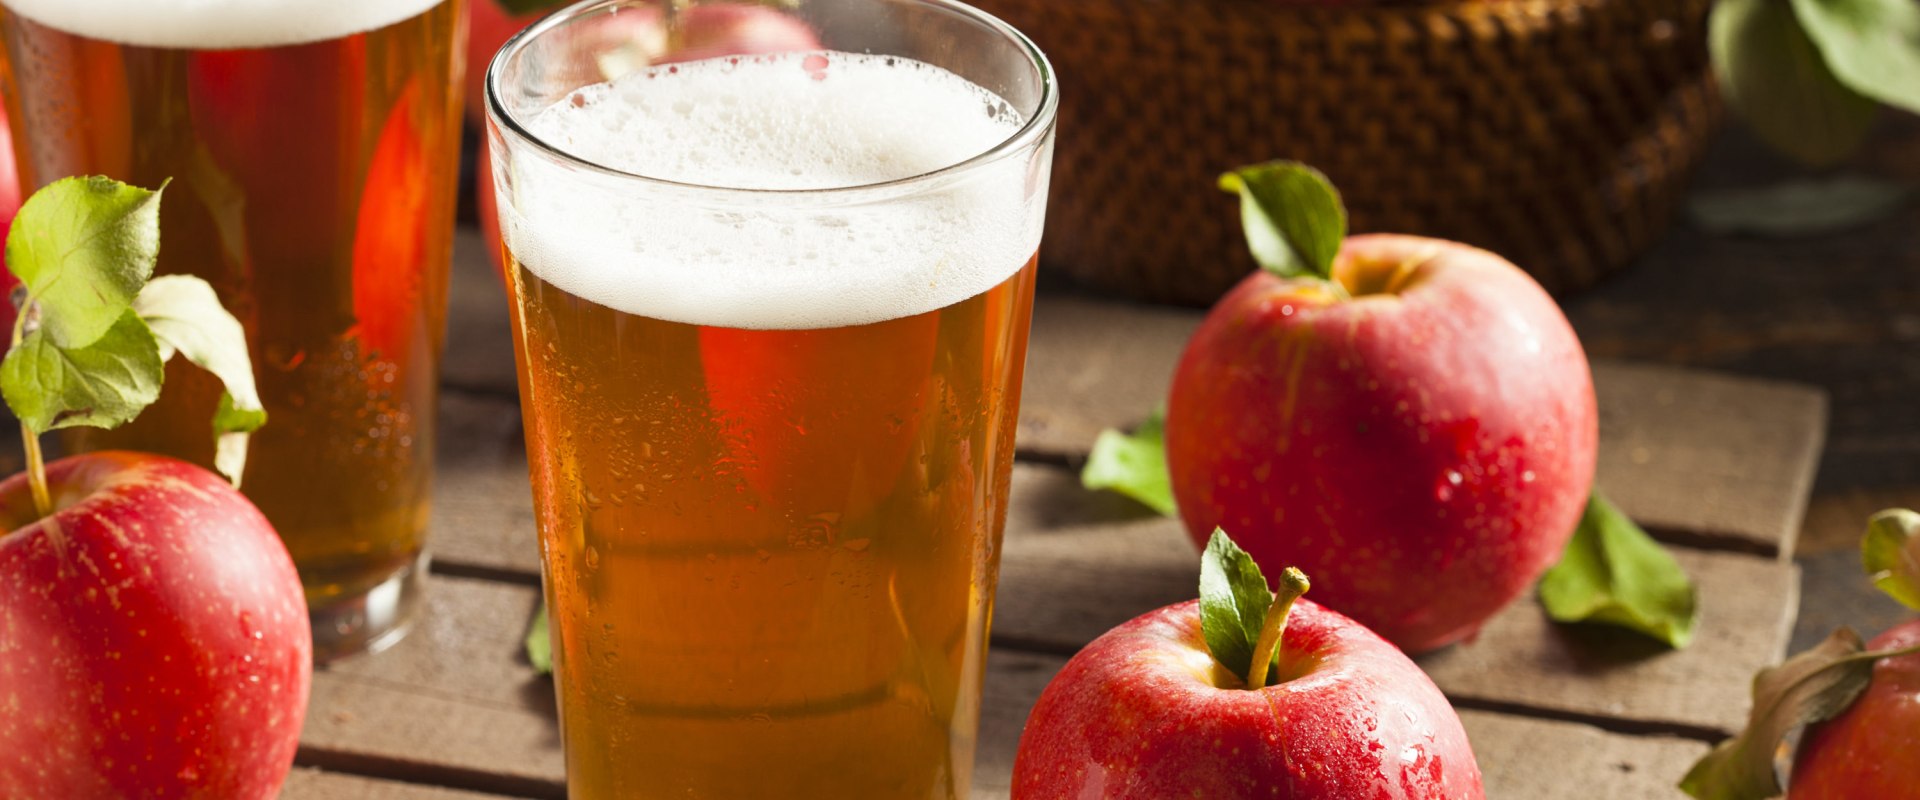 Is alcoholic cider good for you?